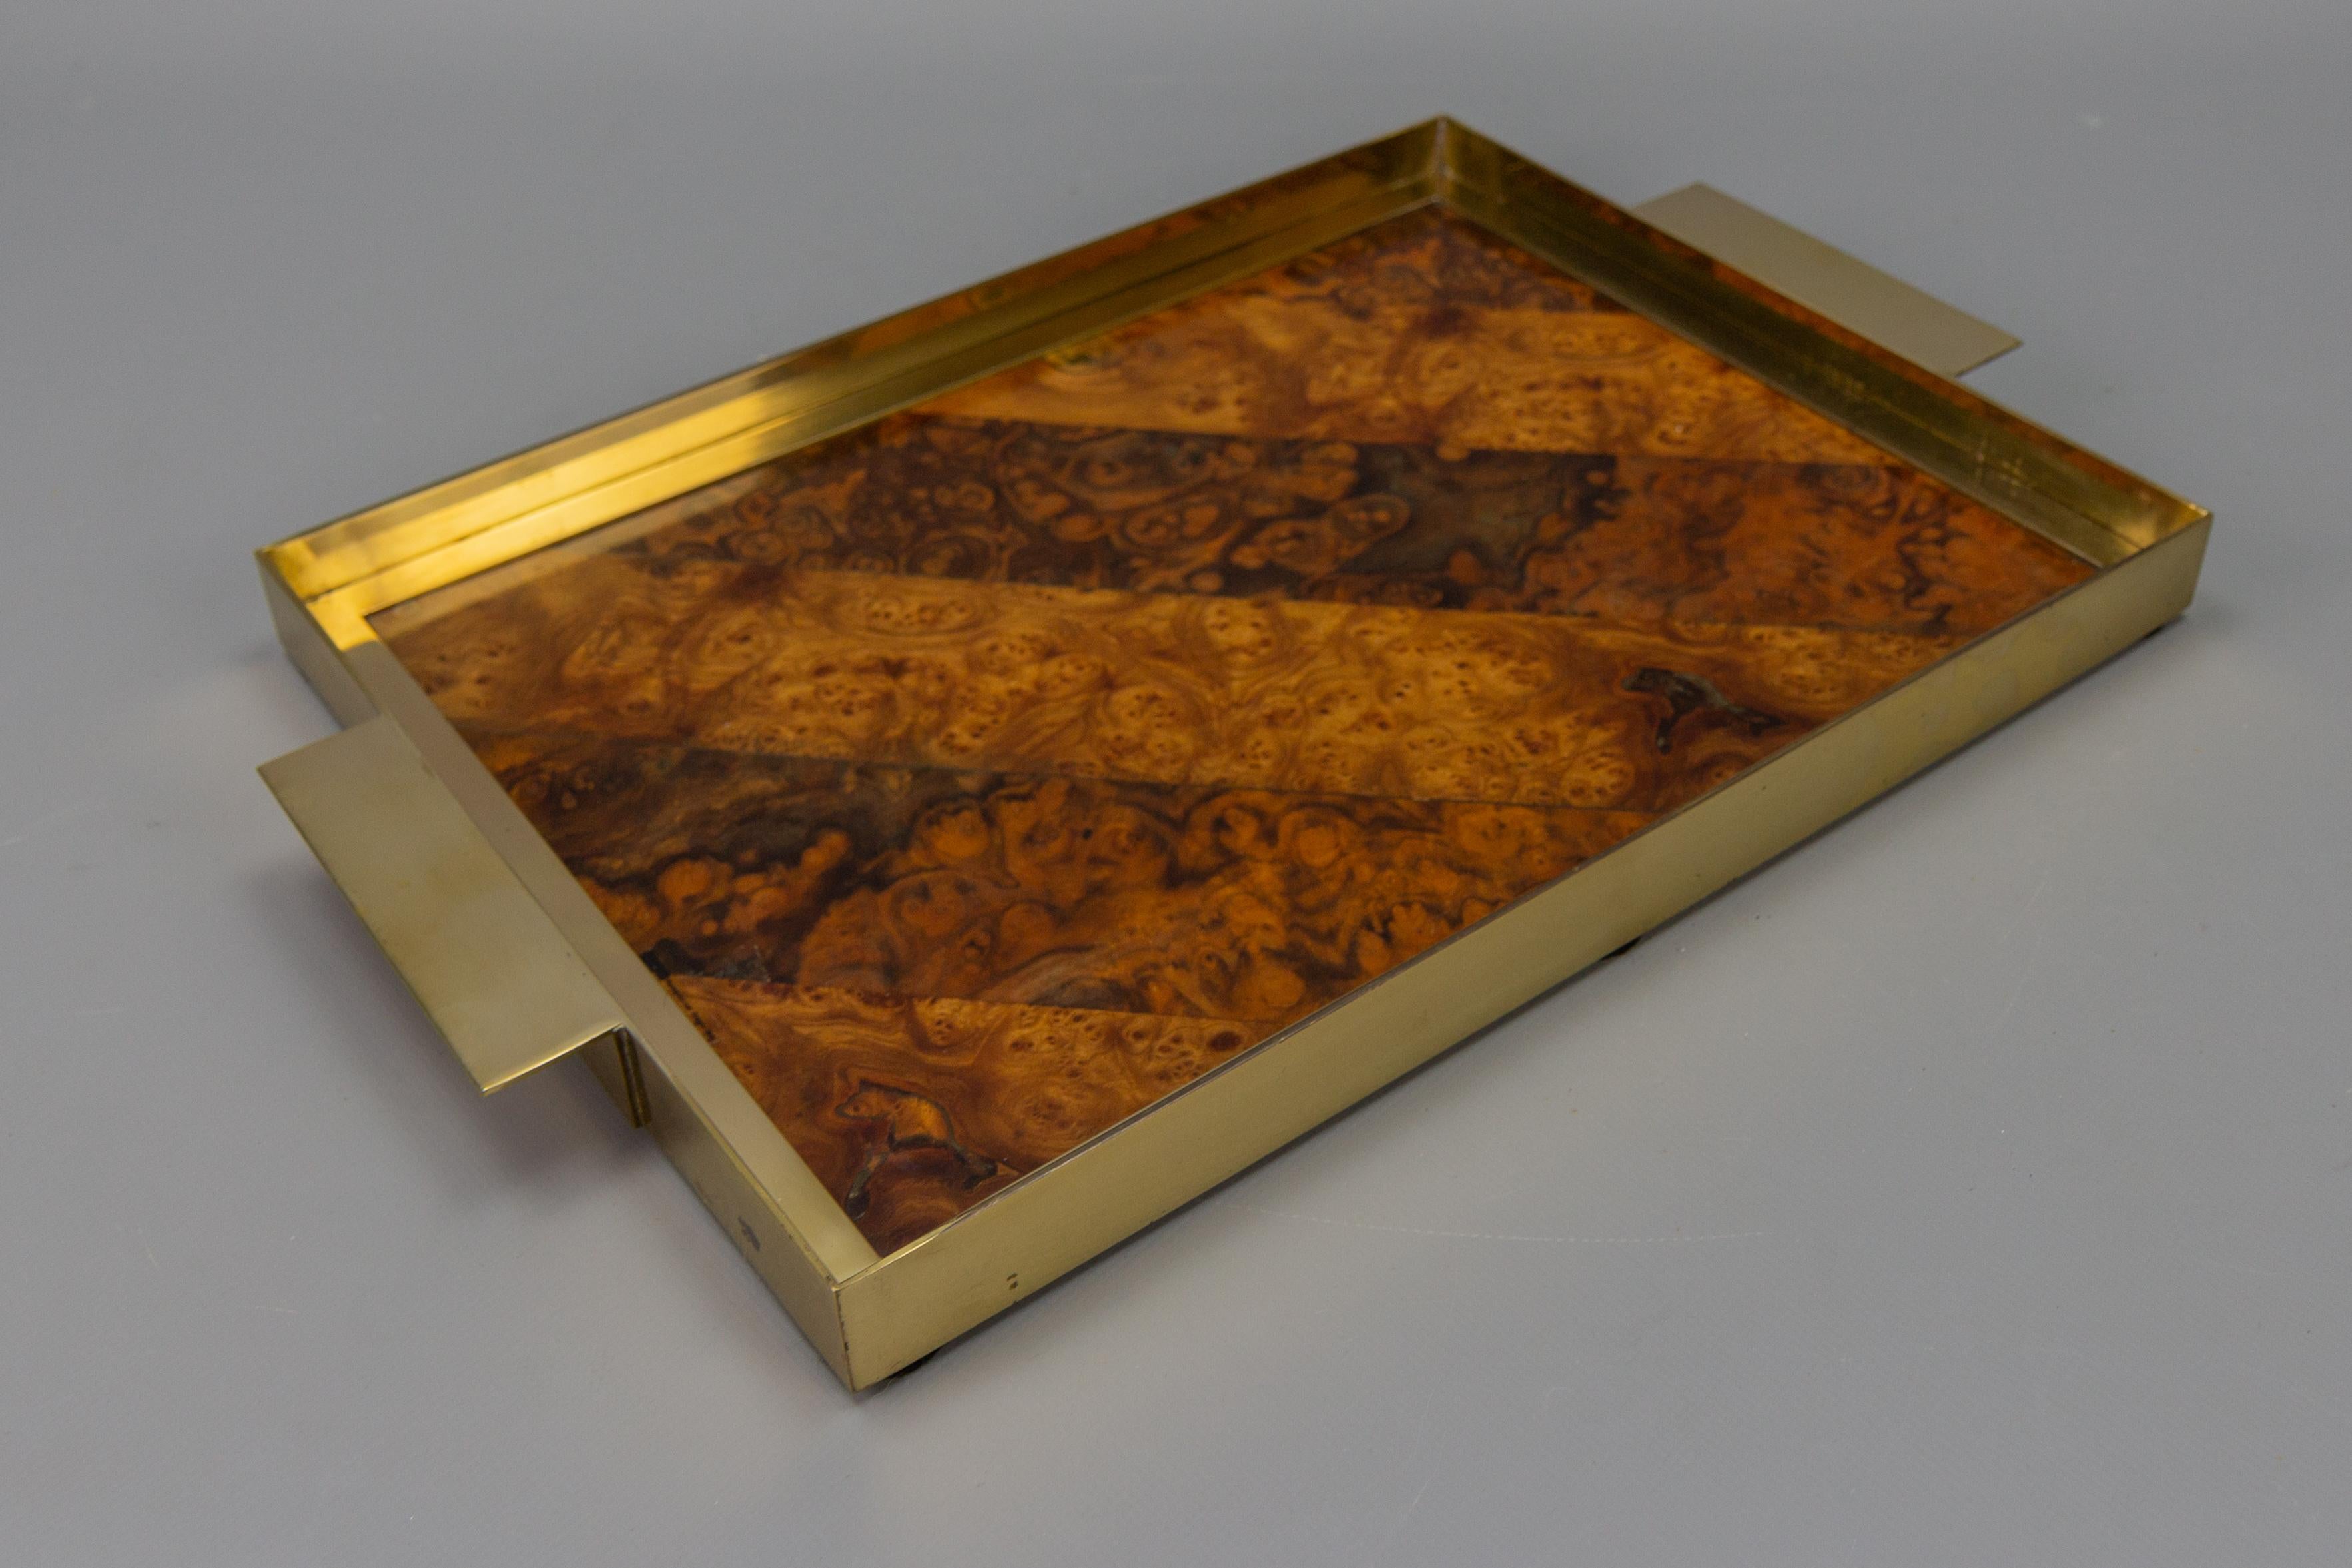 Veneer Mid-Century Brown and Golden Color Serving Tray with Burr Wood Effect, 1960s For Sale